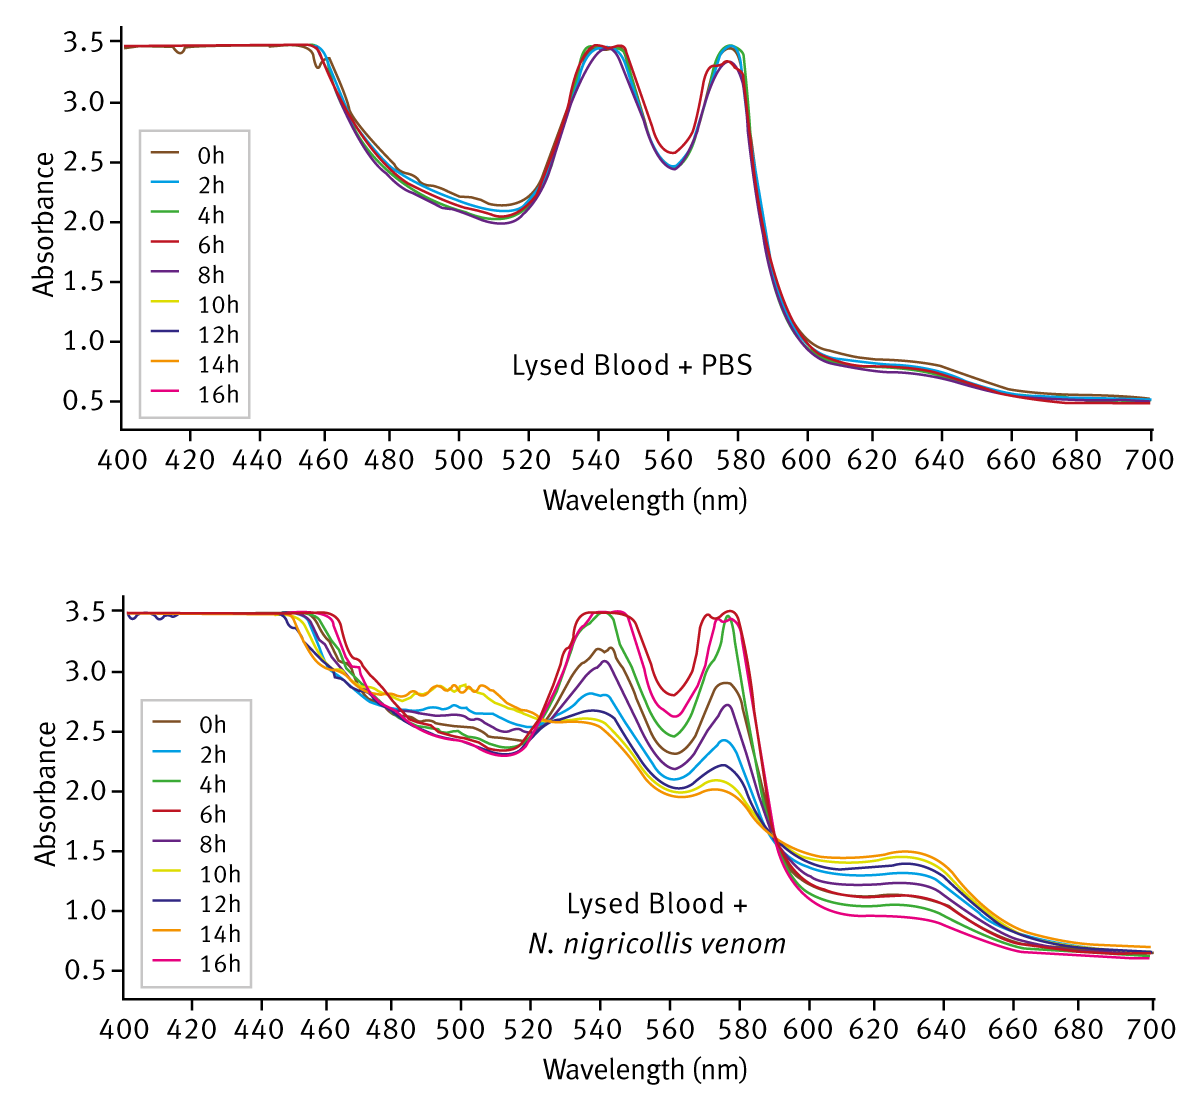 Fig. 2: Time-dependent change in haemoglobin absorbance spectrum in the presence of N.nigricollis venom Lysed sheep blood incubated with PBS only (upper graph) or N. nigricollis venom (lower graph). Spectrum recorded at 2 hour intervals.